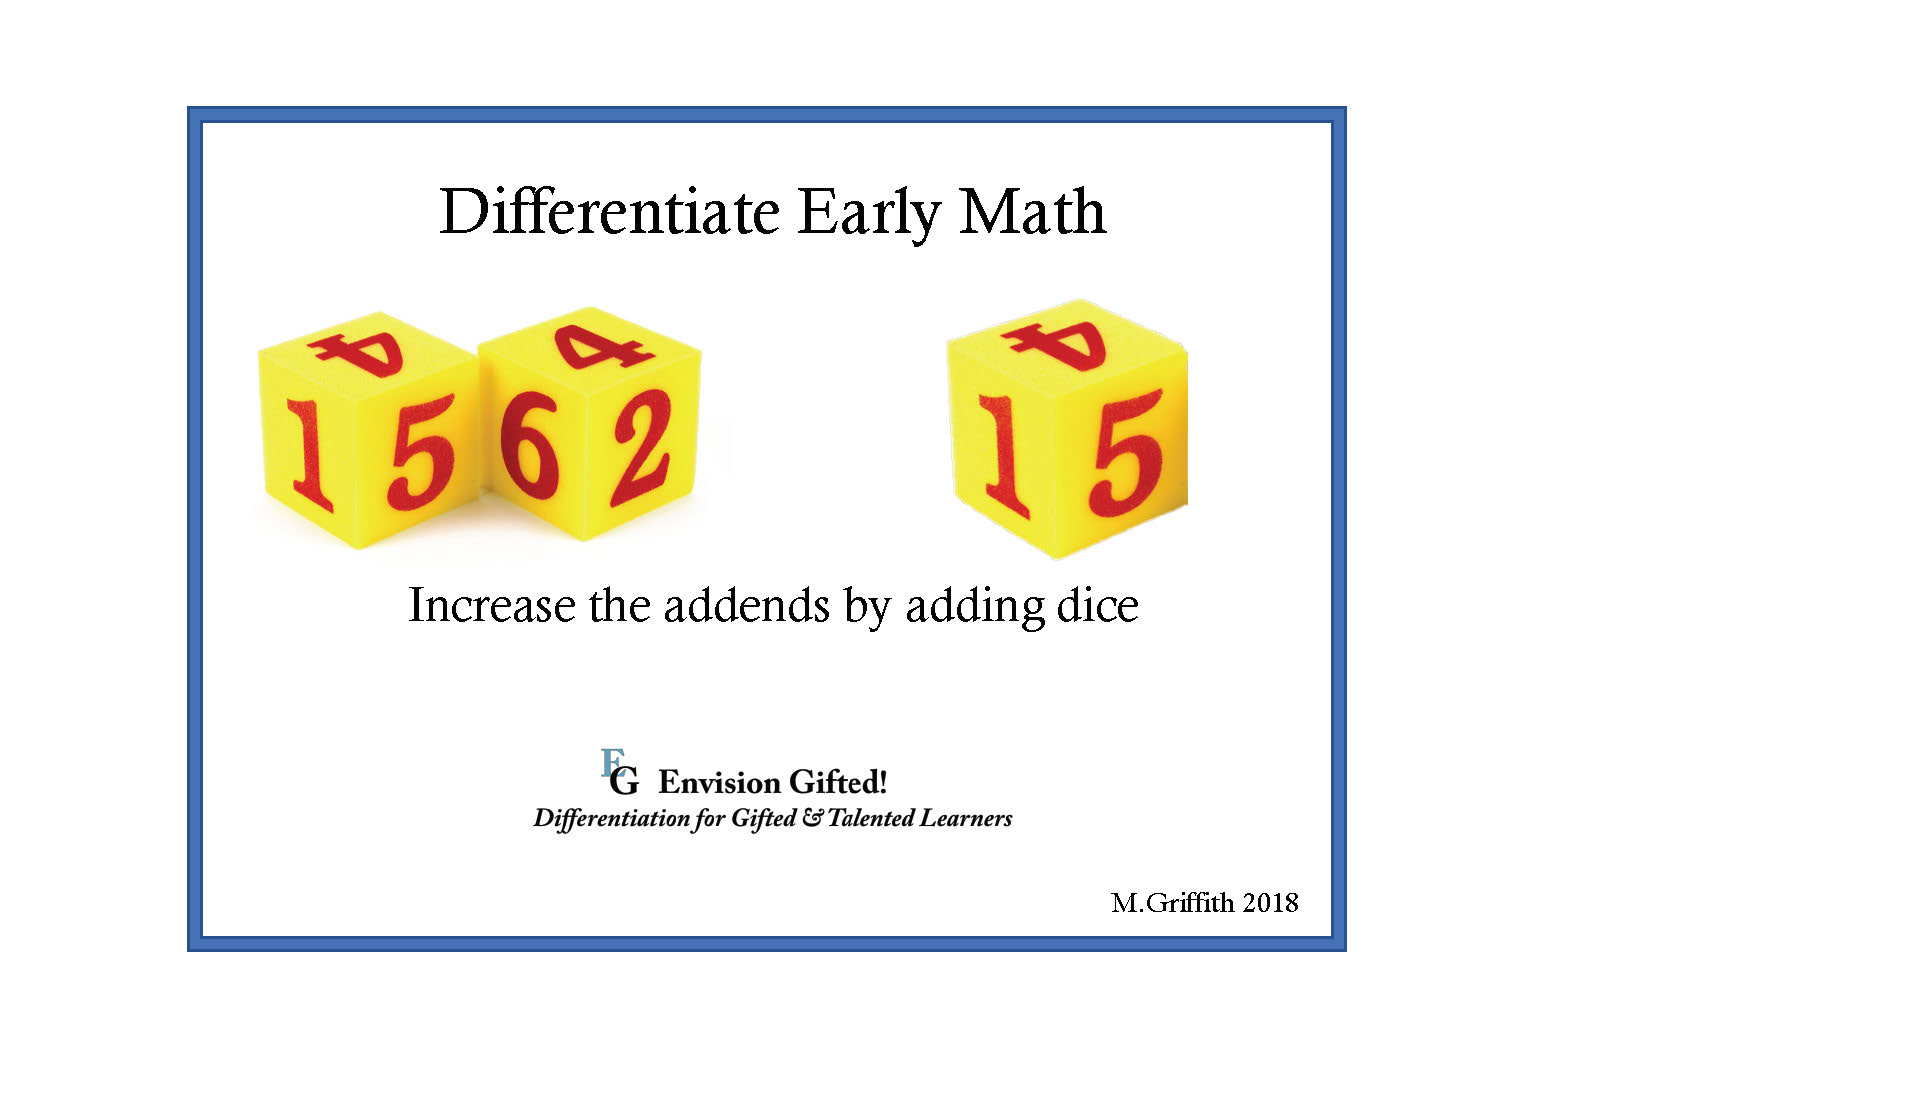 Envision Gifted - Differentiate Math